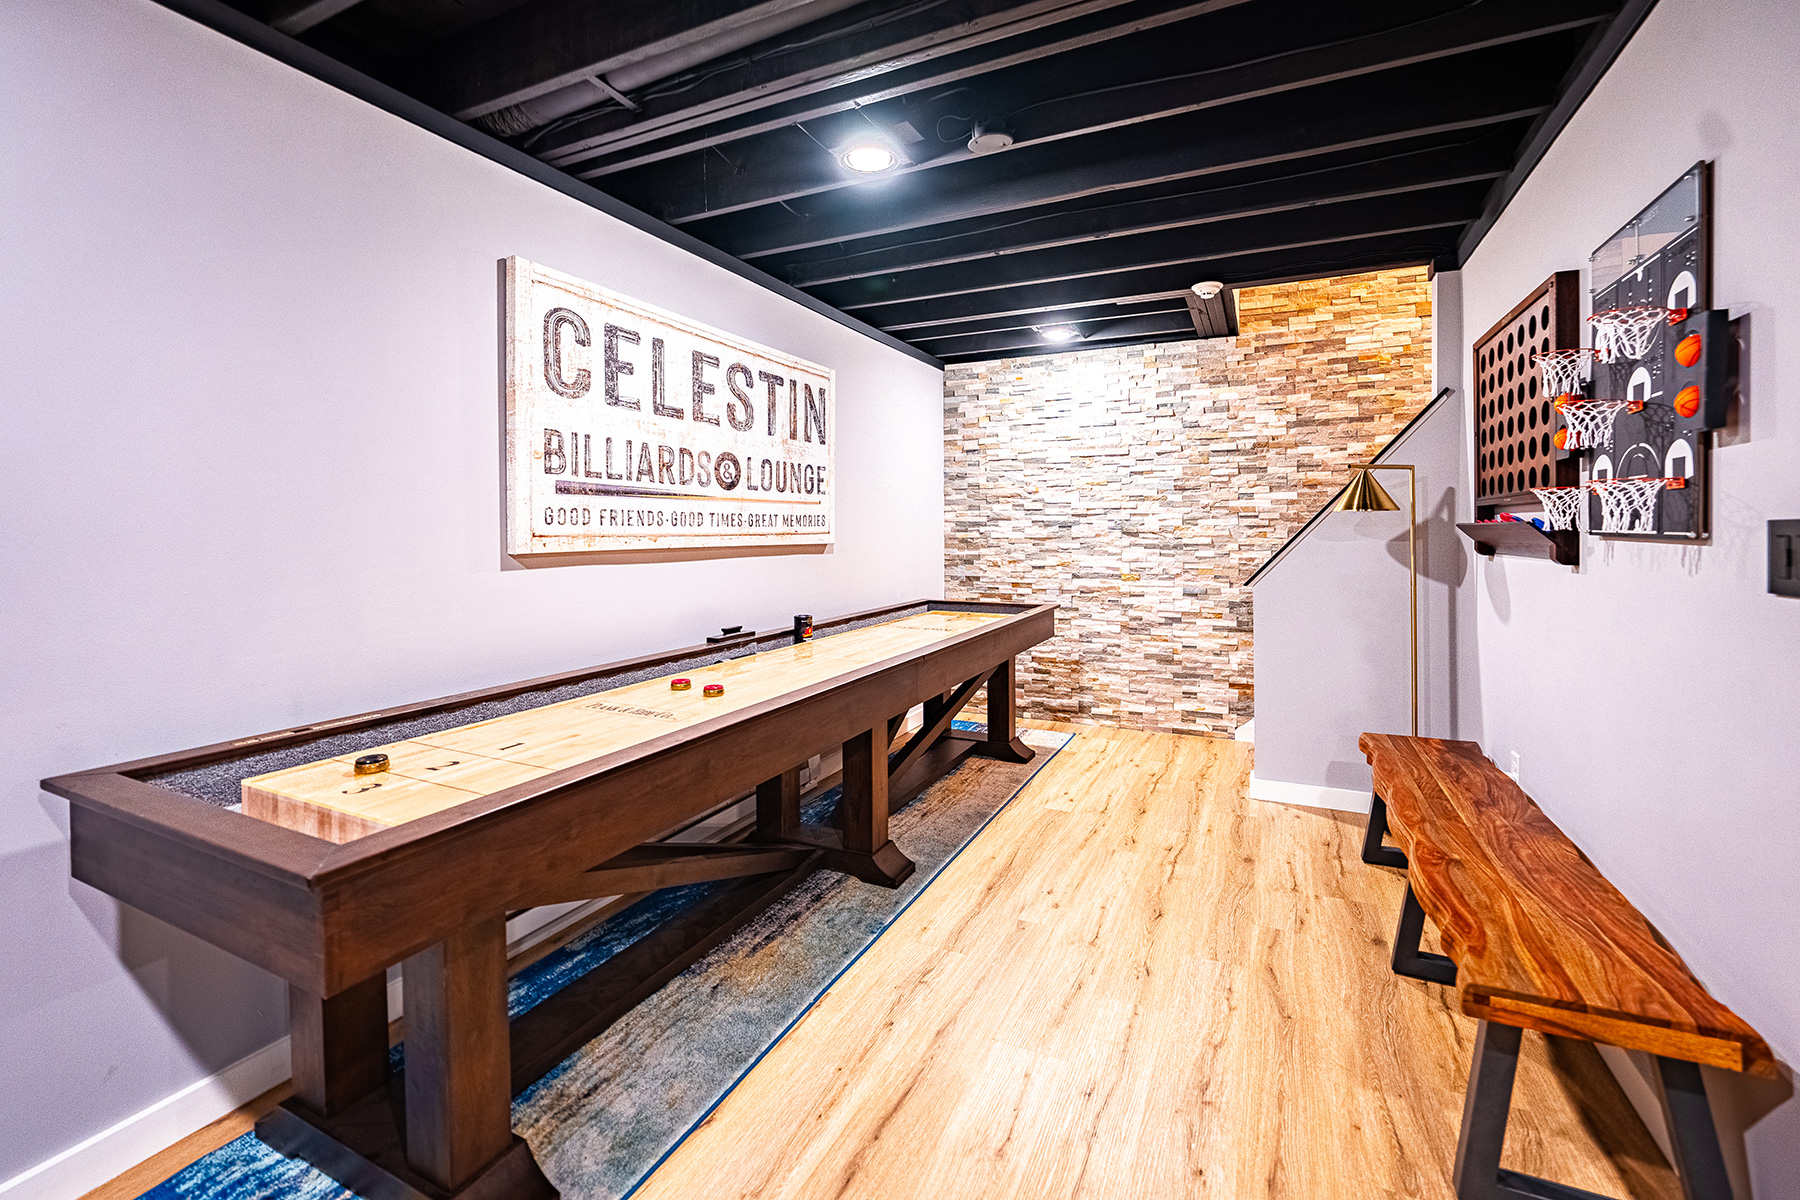 Crafting a Luxurious Basement Cigar Lounge in Eagleville, PA